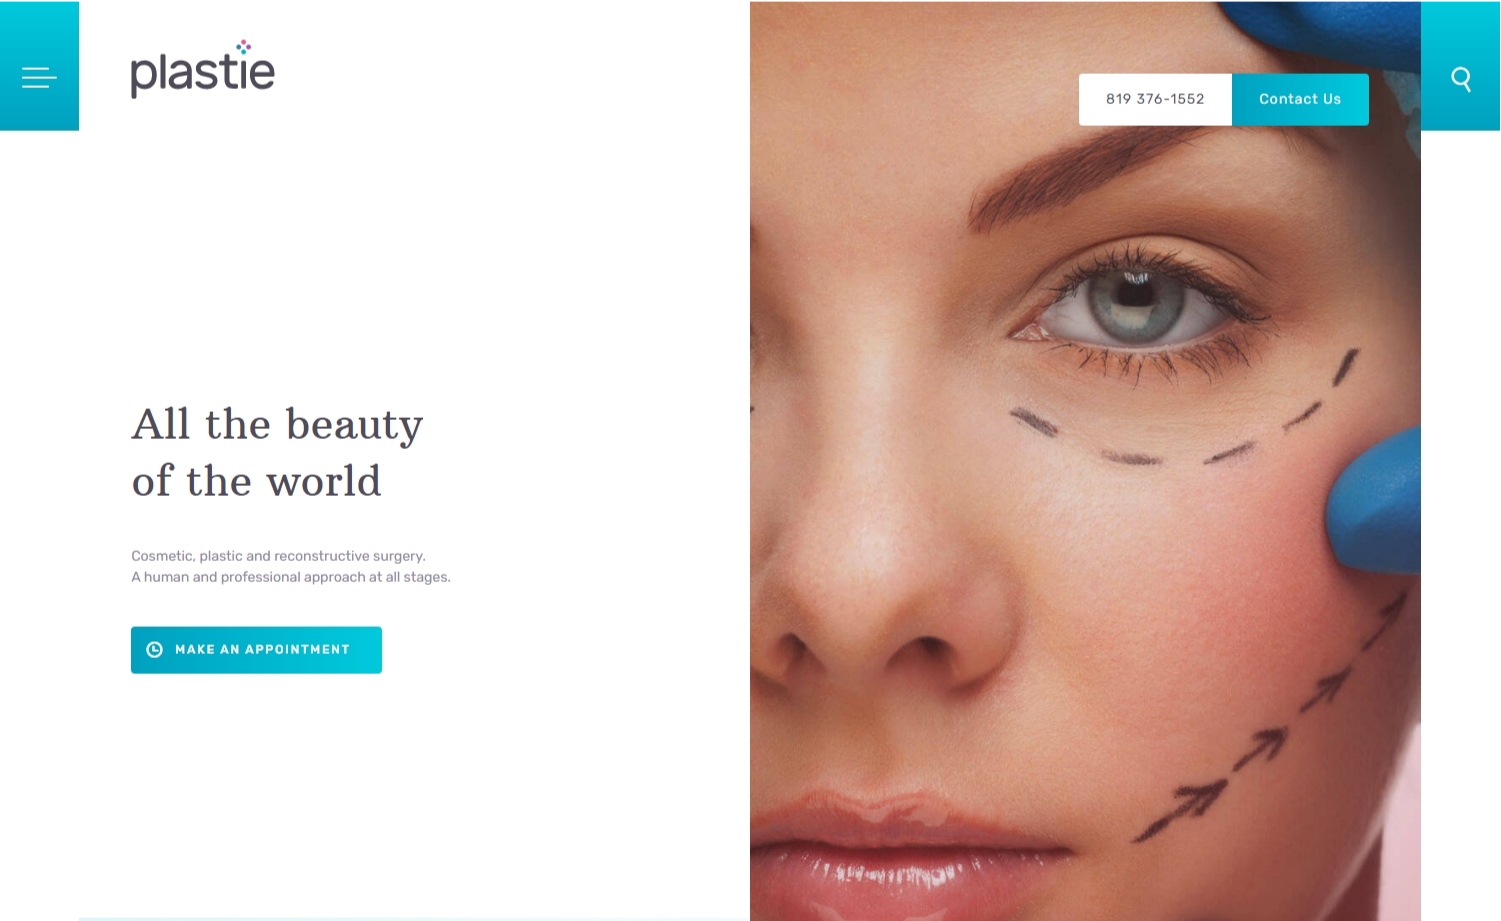 Plastic Surgery Websites for Inspiration